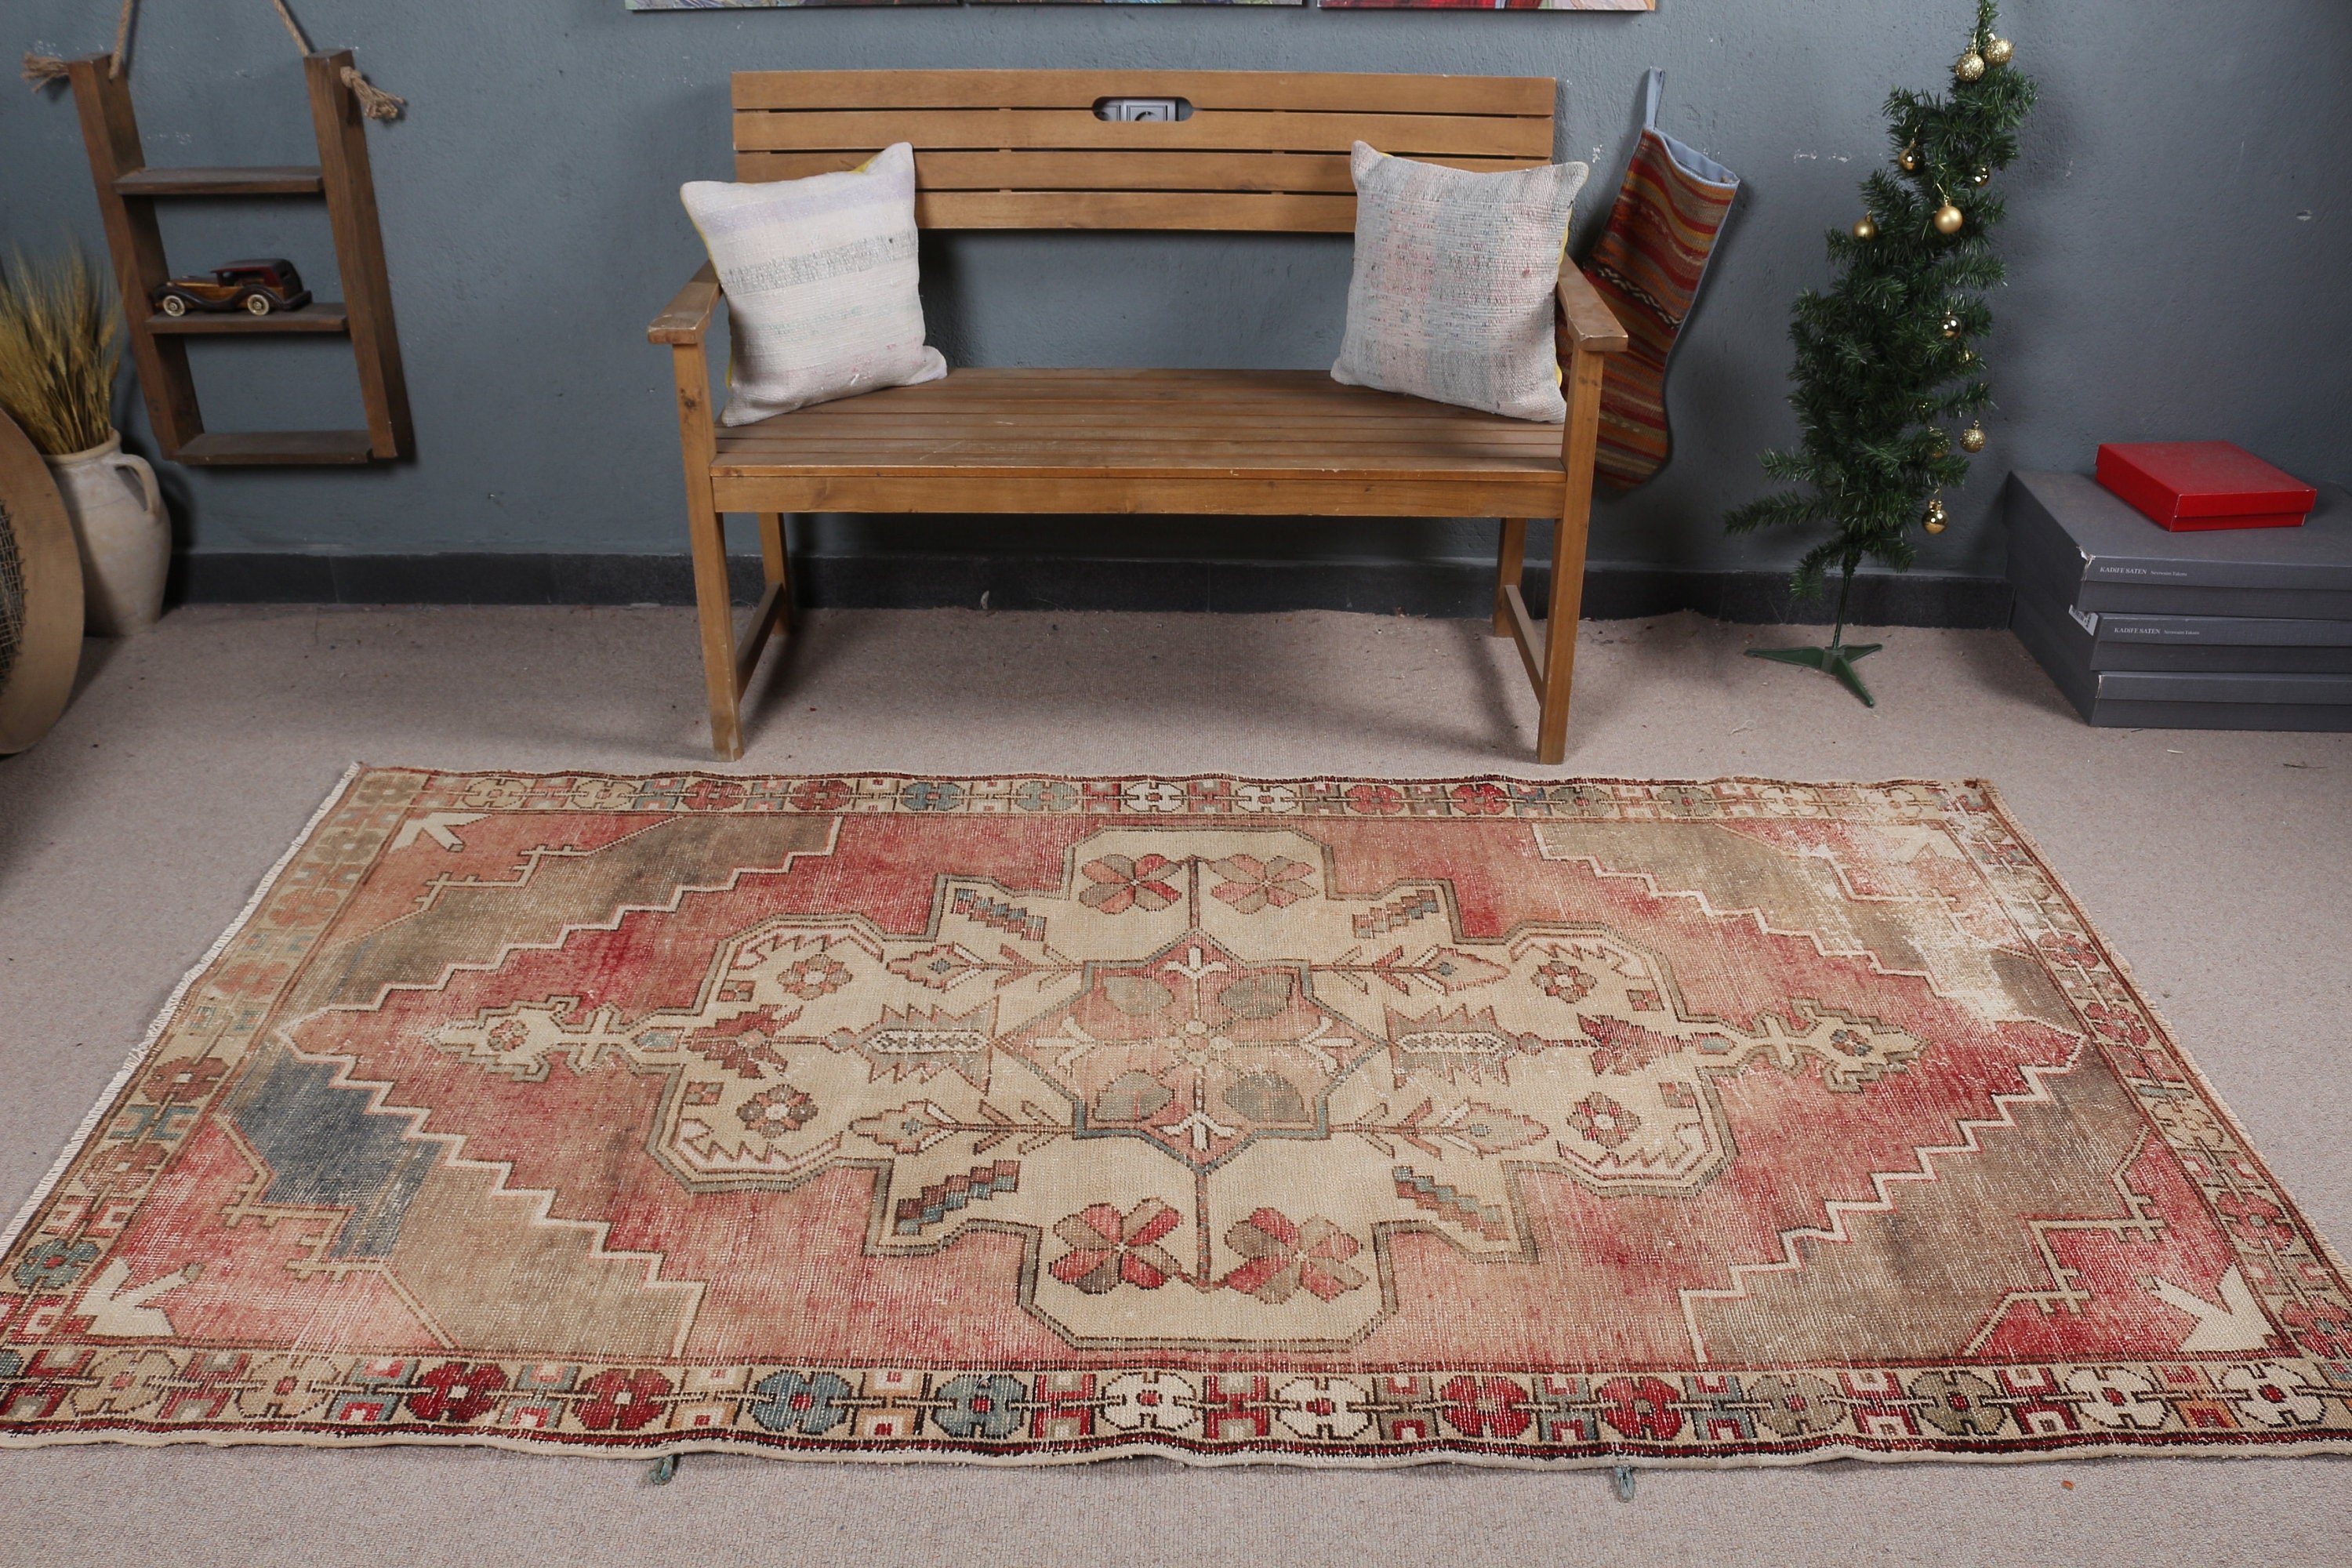 Red Kitchen Rug, Vintage Rugs, Indoor Rug, Moroccan Rugs, 4.2x7.8 ft Area Rug, Turkish Rugs, Rugs for Area, Bedroom Rugs